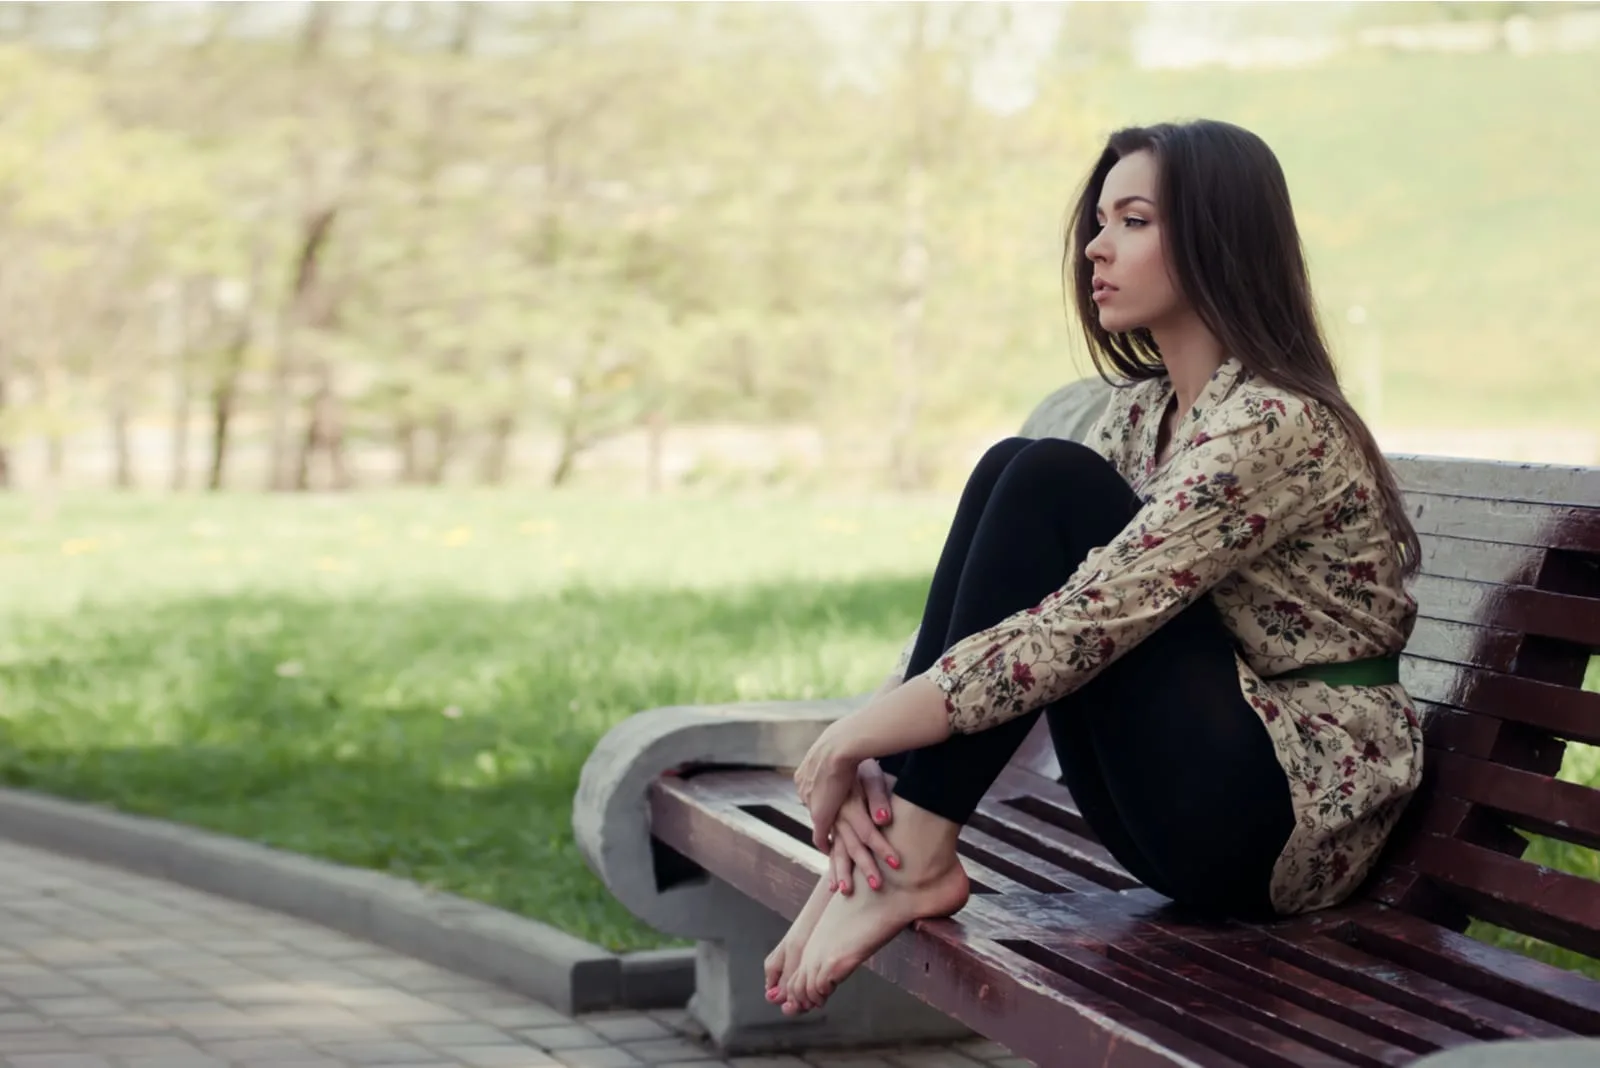 a woman with long black hair is sitting on a bench